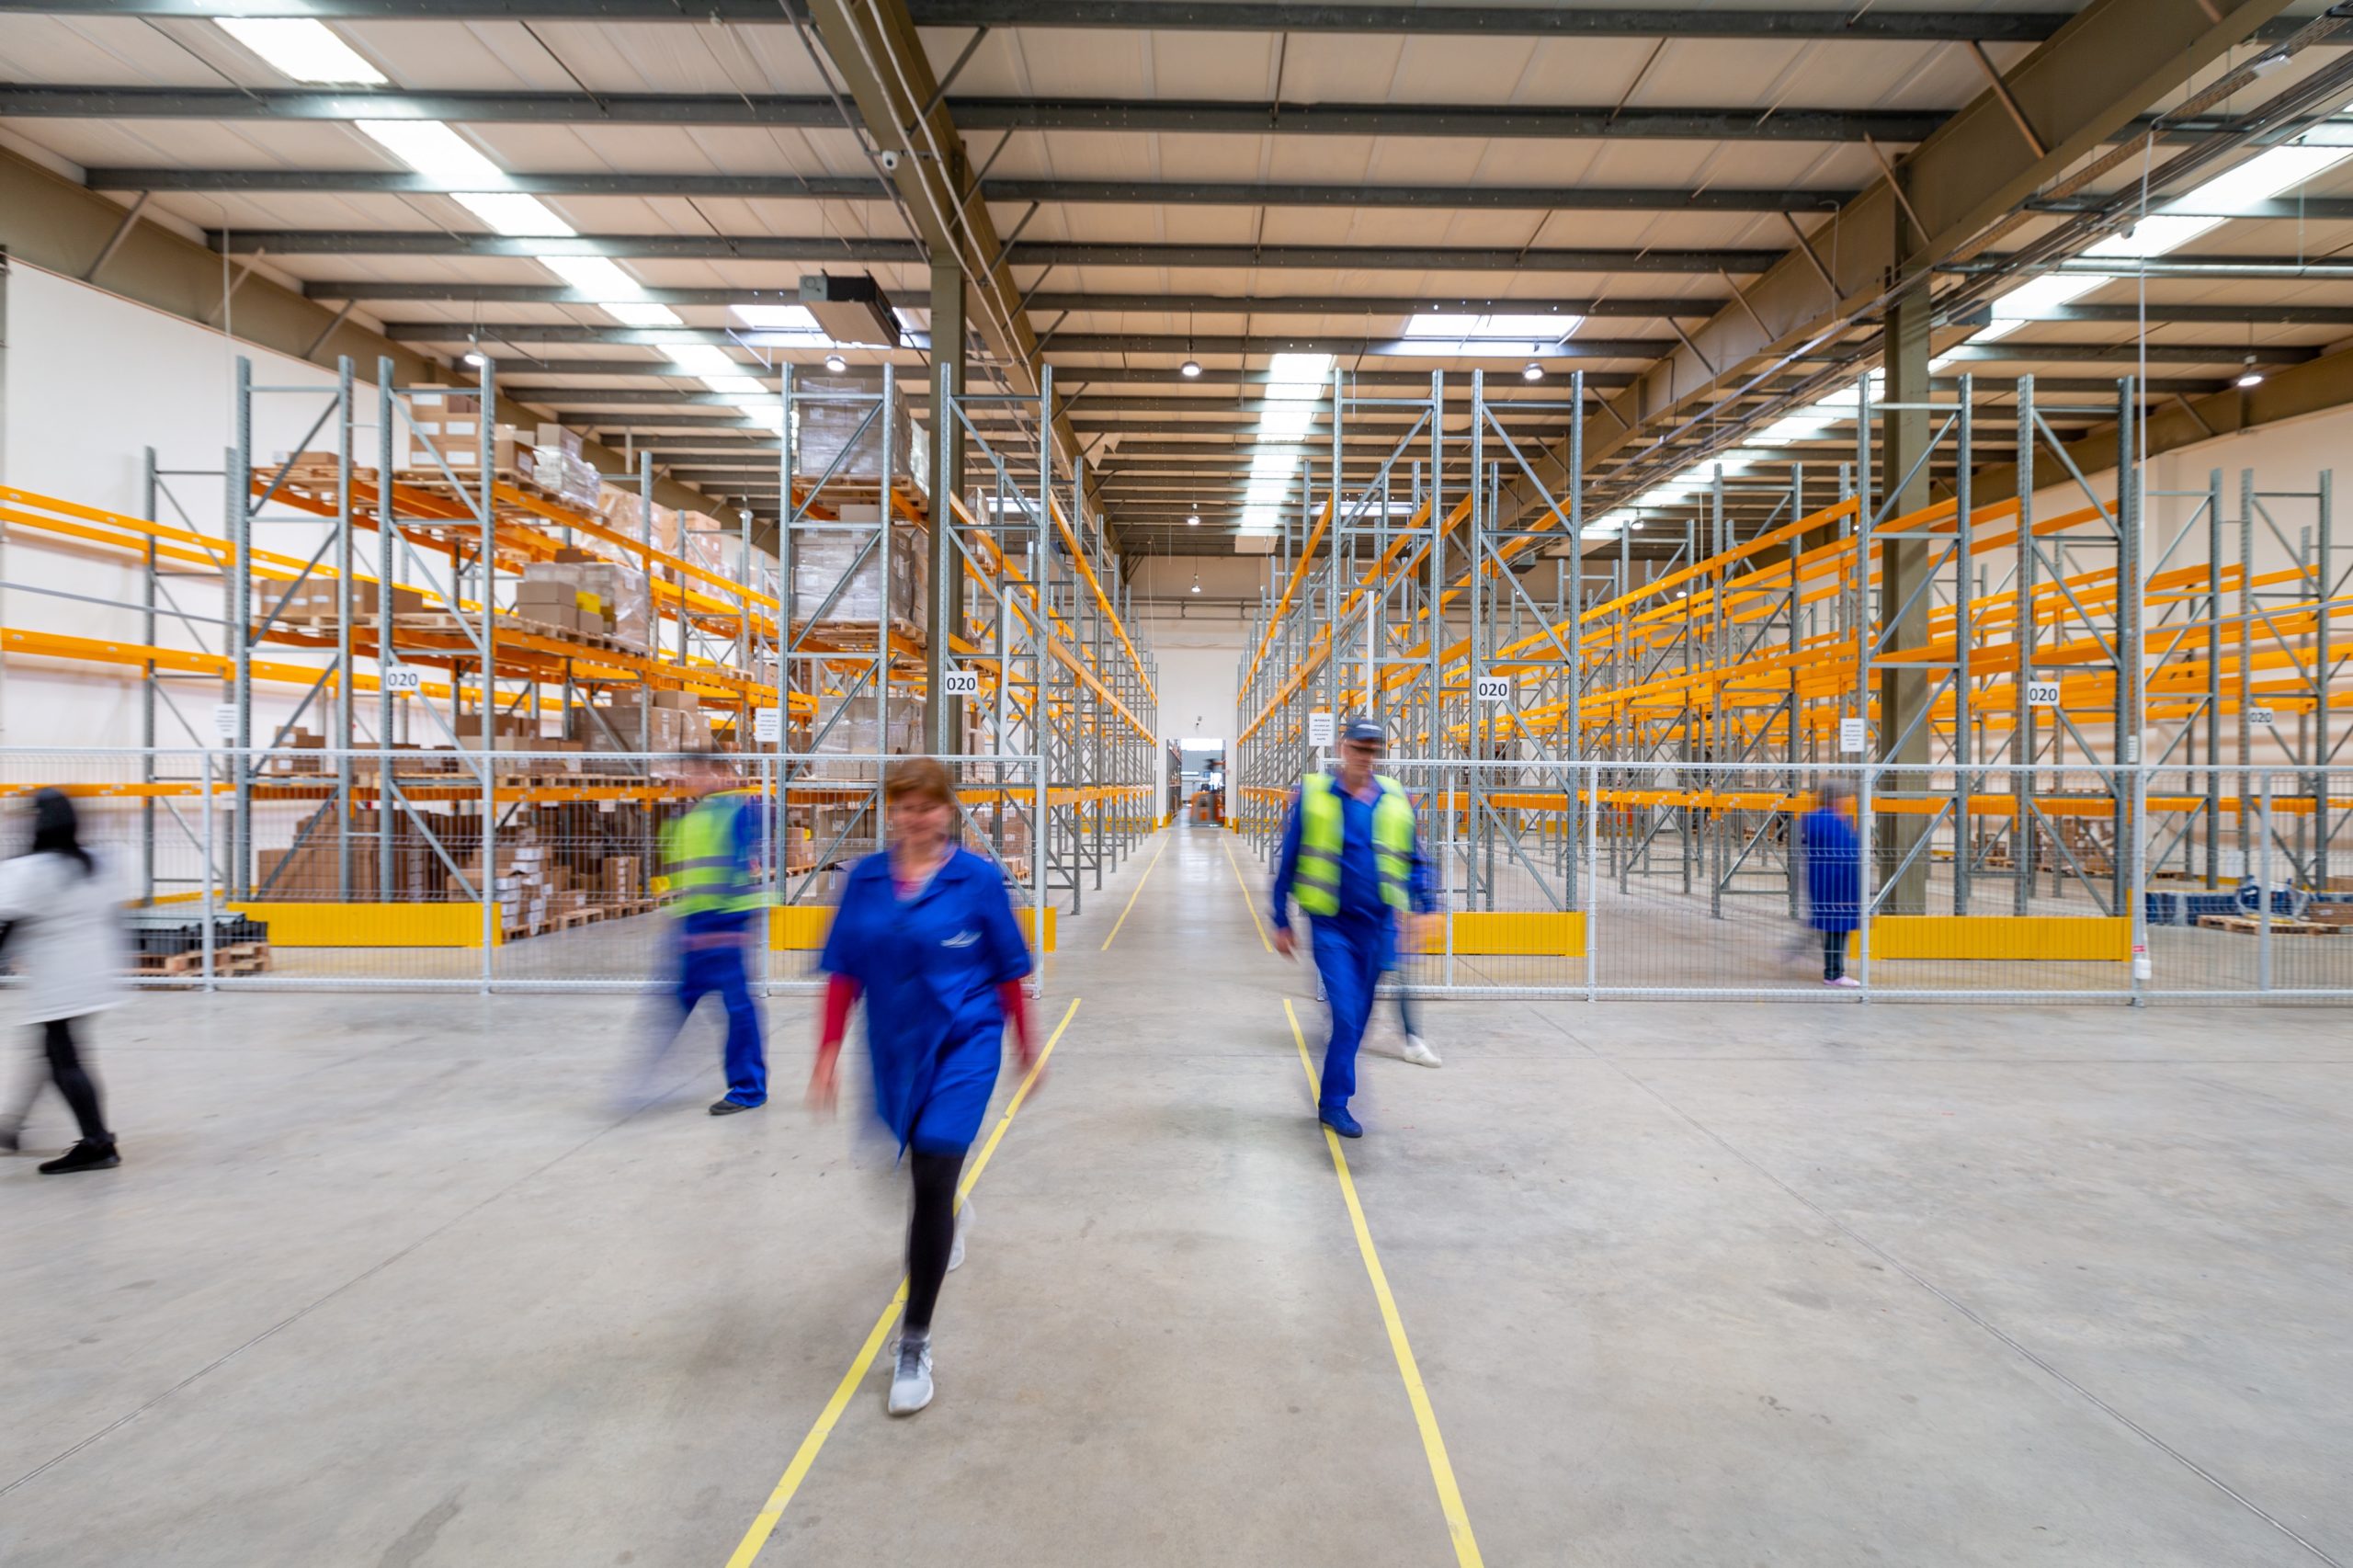 Warehouse uses different types of security systems for business